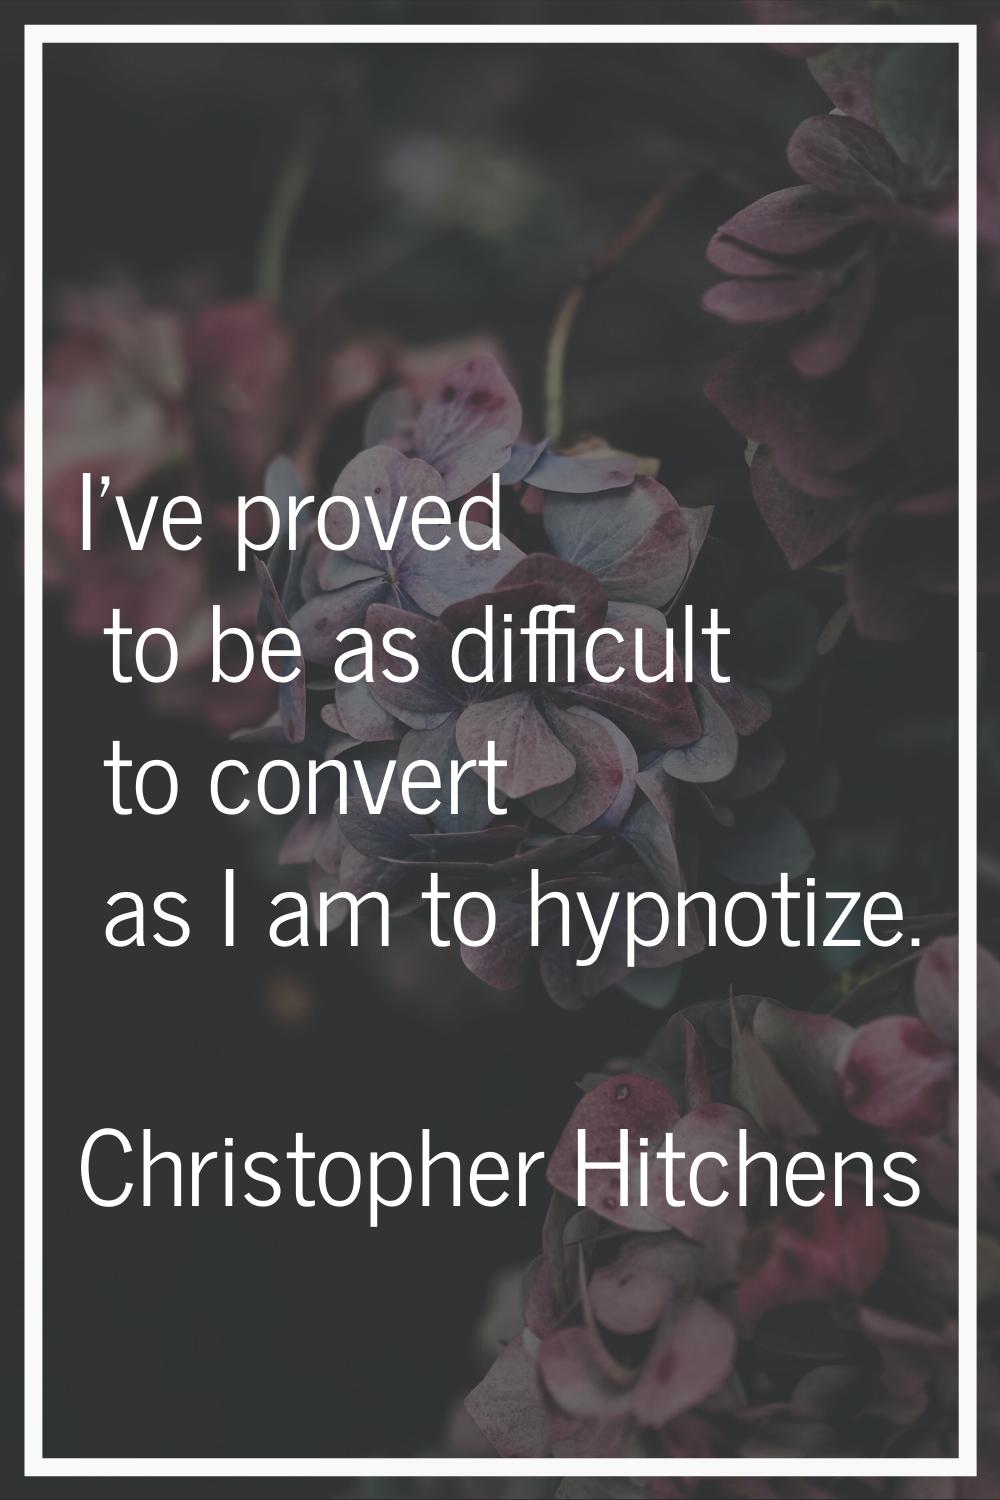 I've proved to be as difficult to convert as I am to hypnotize.